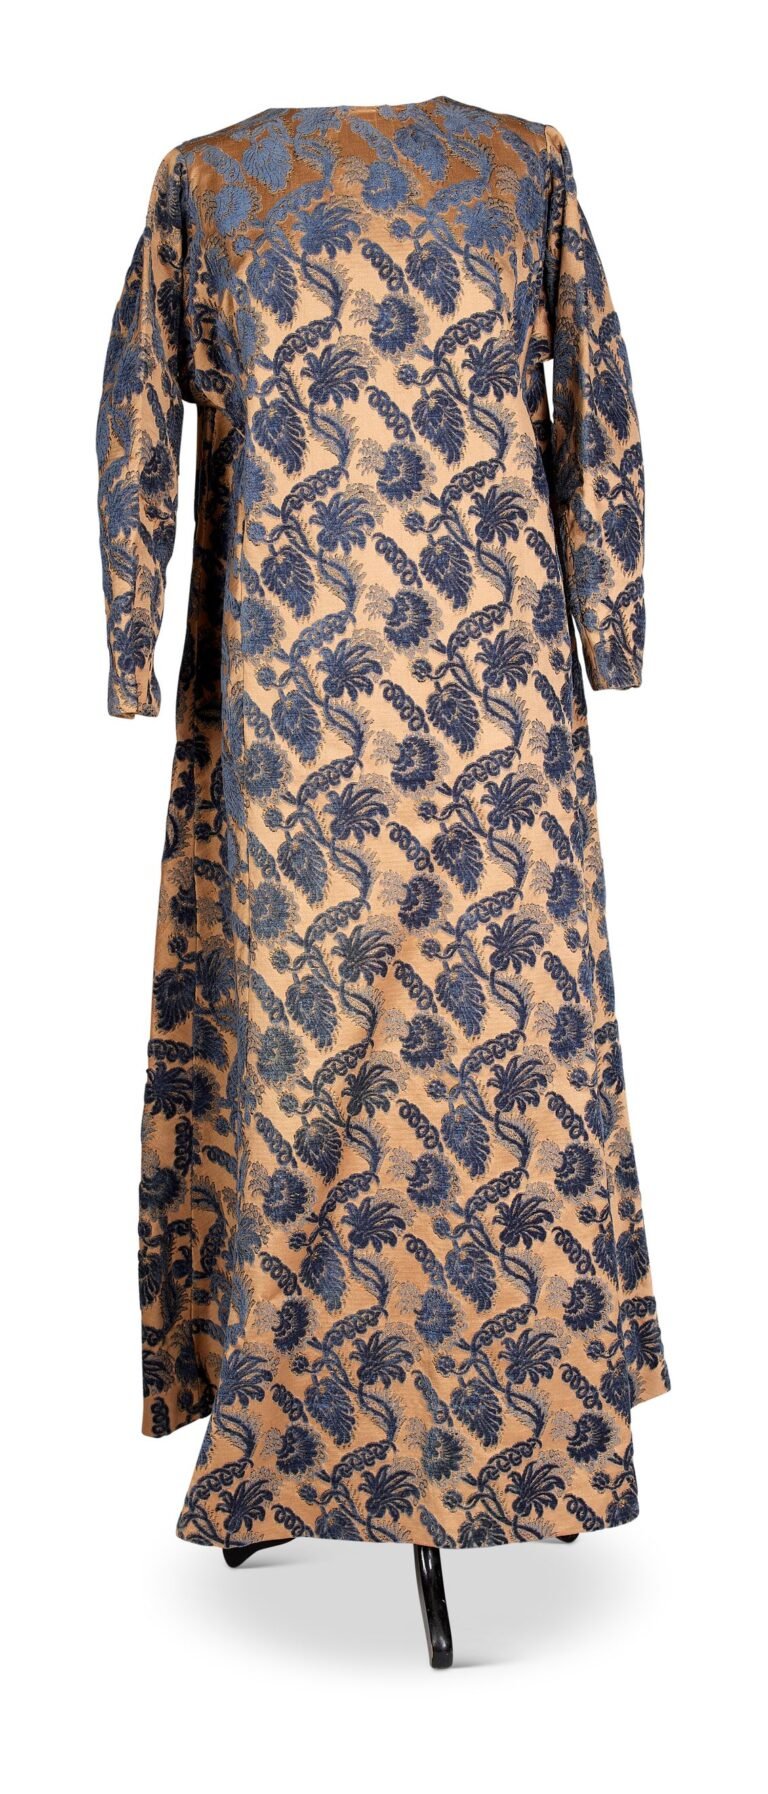 Edith Sitwell gown. Photo Dreweatts